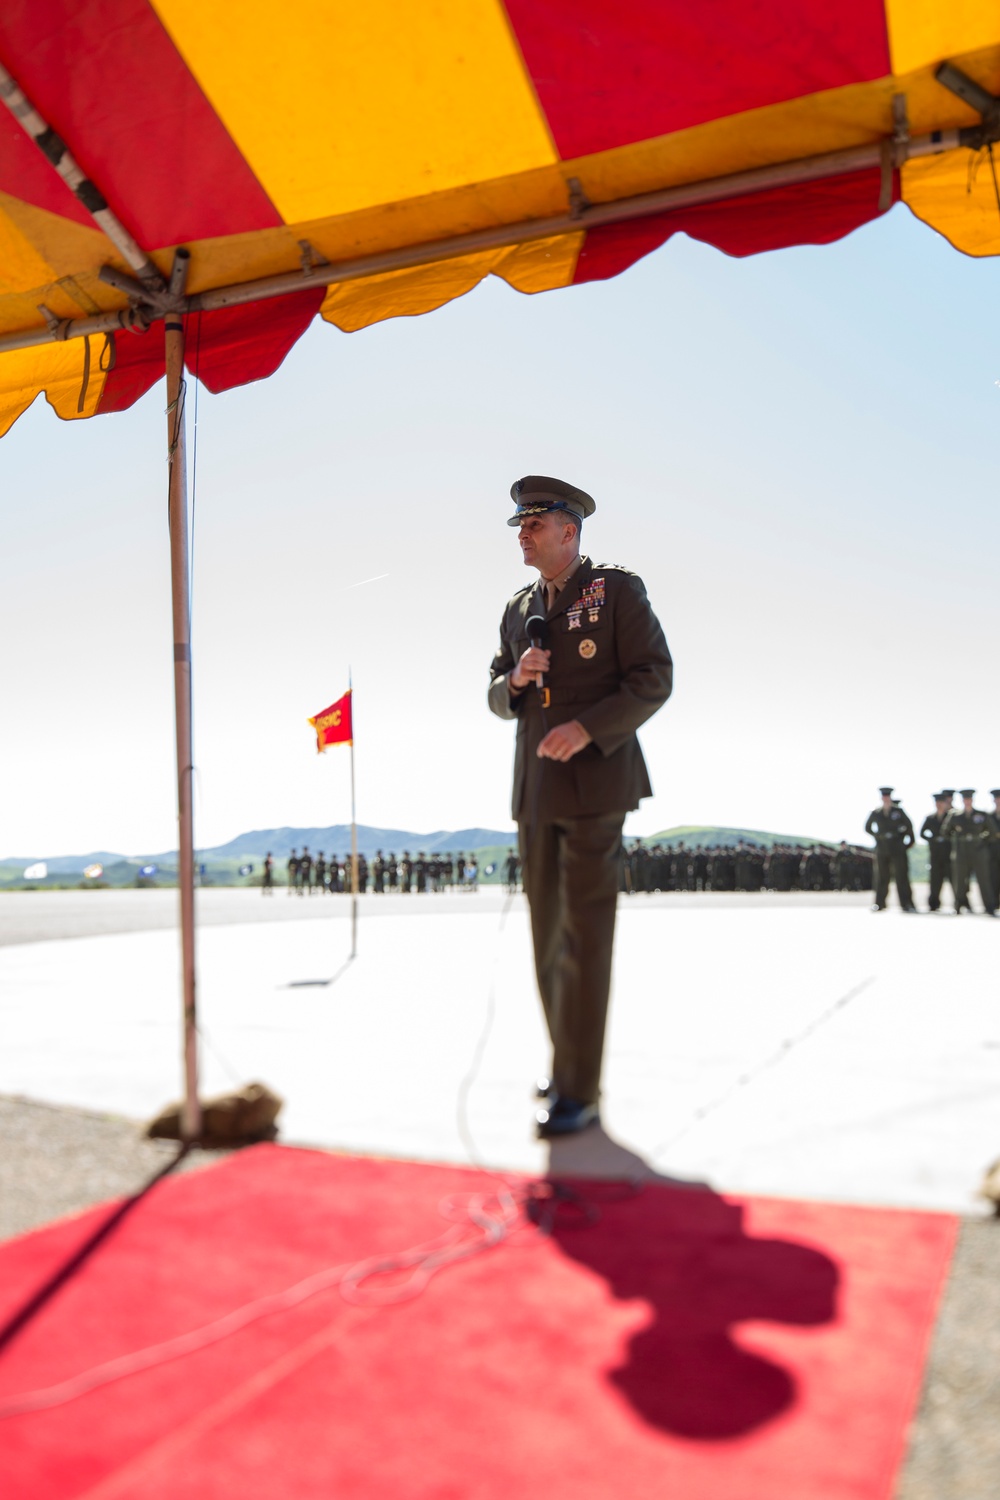 Change of Command Ceremony for 5th Marine Regiment